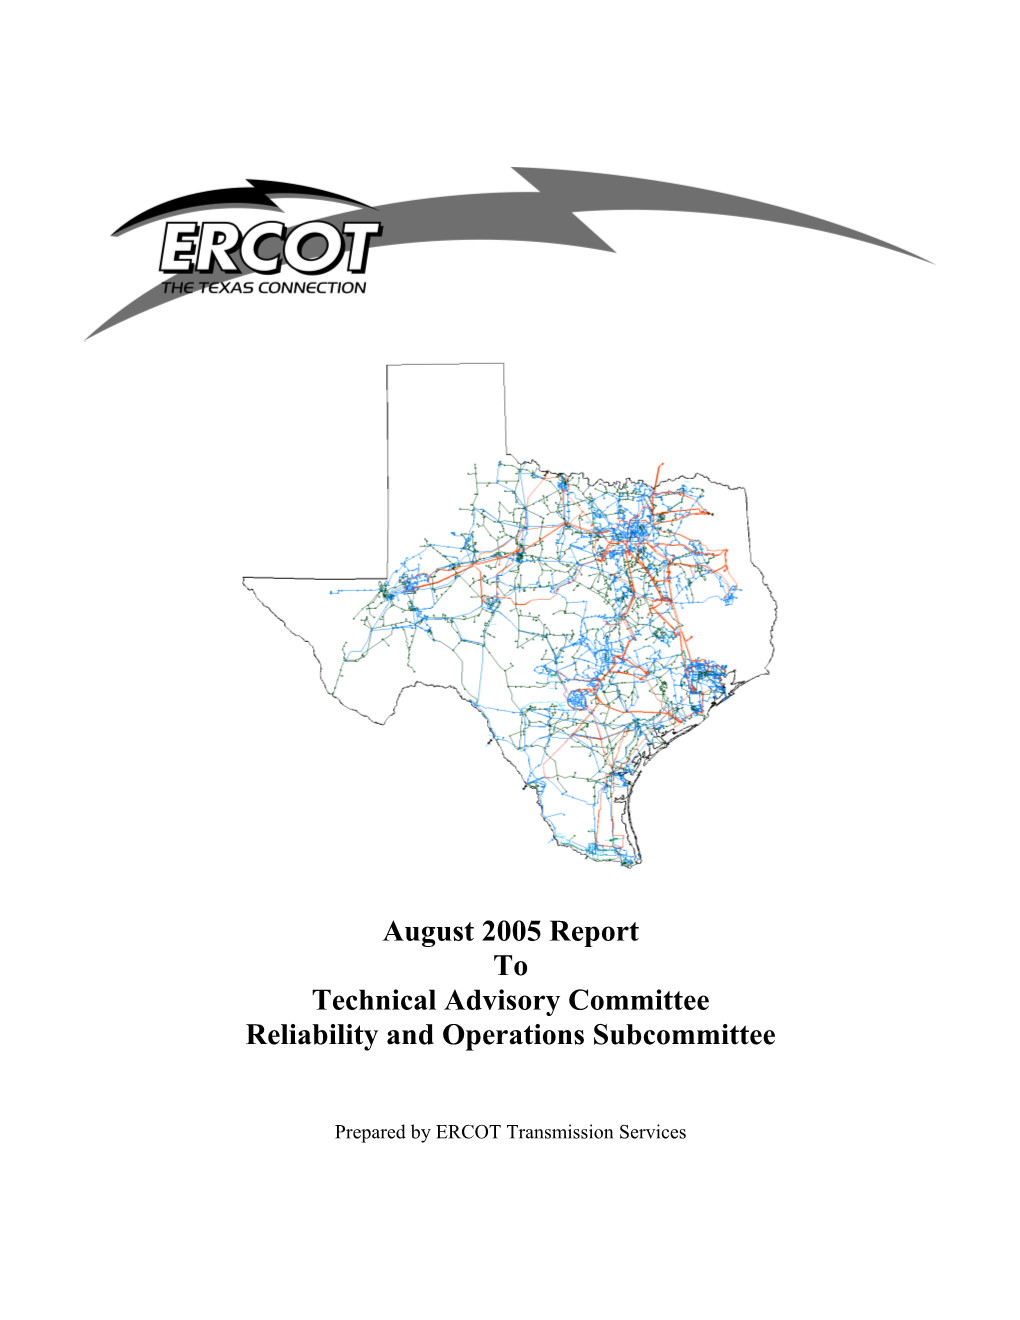 August Report to ROS - ERCOT Transmission Services Page 2 of 20 9/12/05